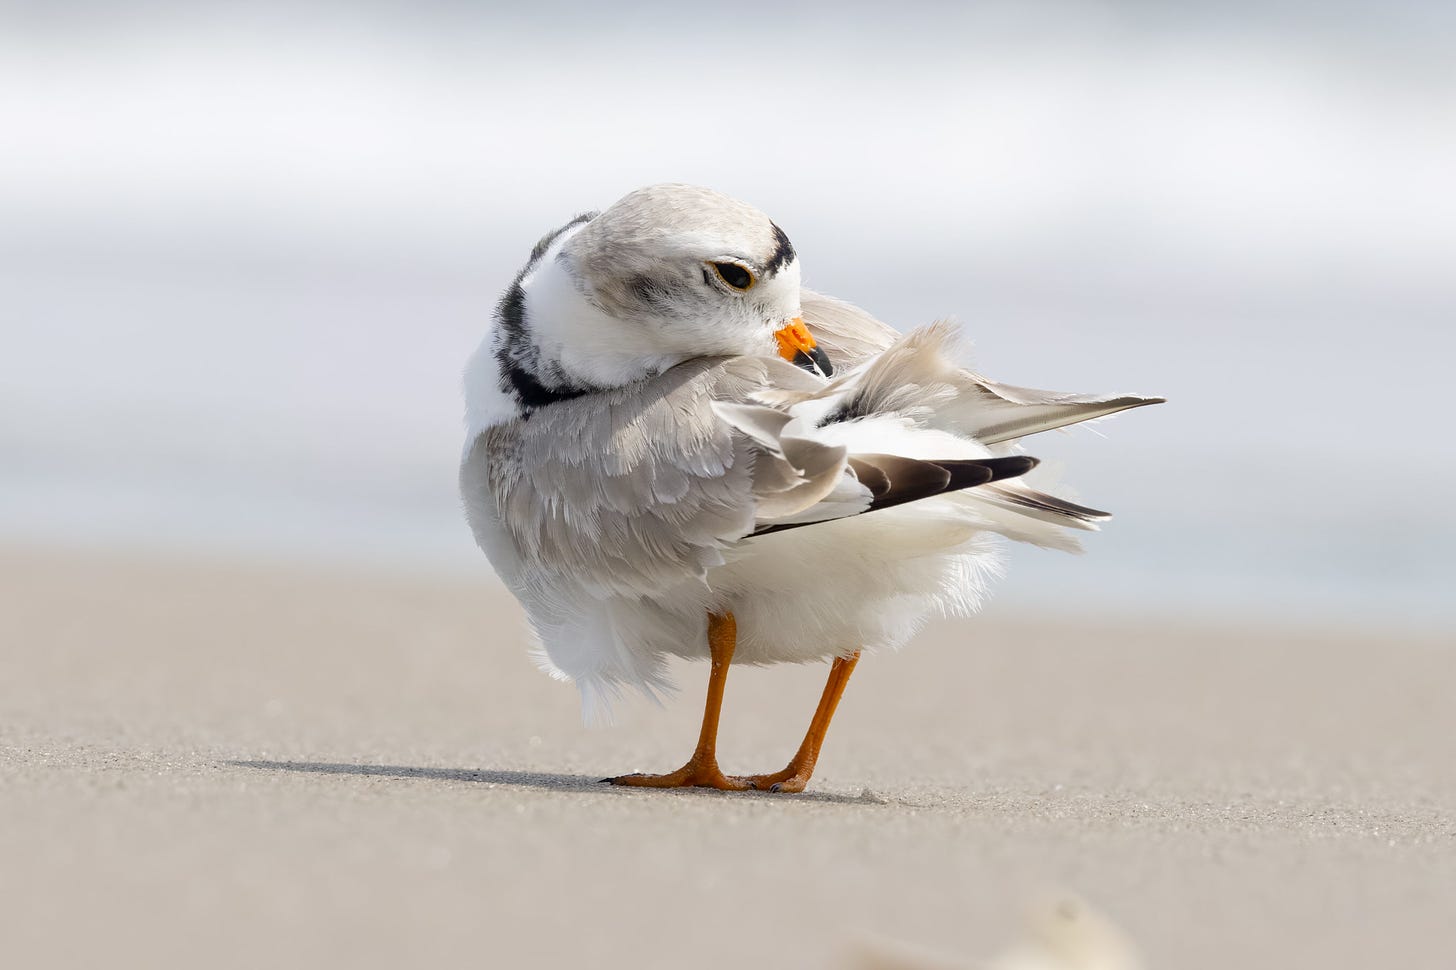 a small white bird with a black color, orange legs, black wingtips, black forehead, and black-tipped tiny orange beak preening its feathers as it stands facing left and away in the sand.